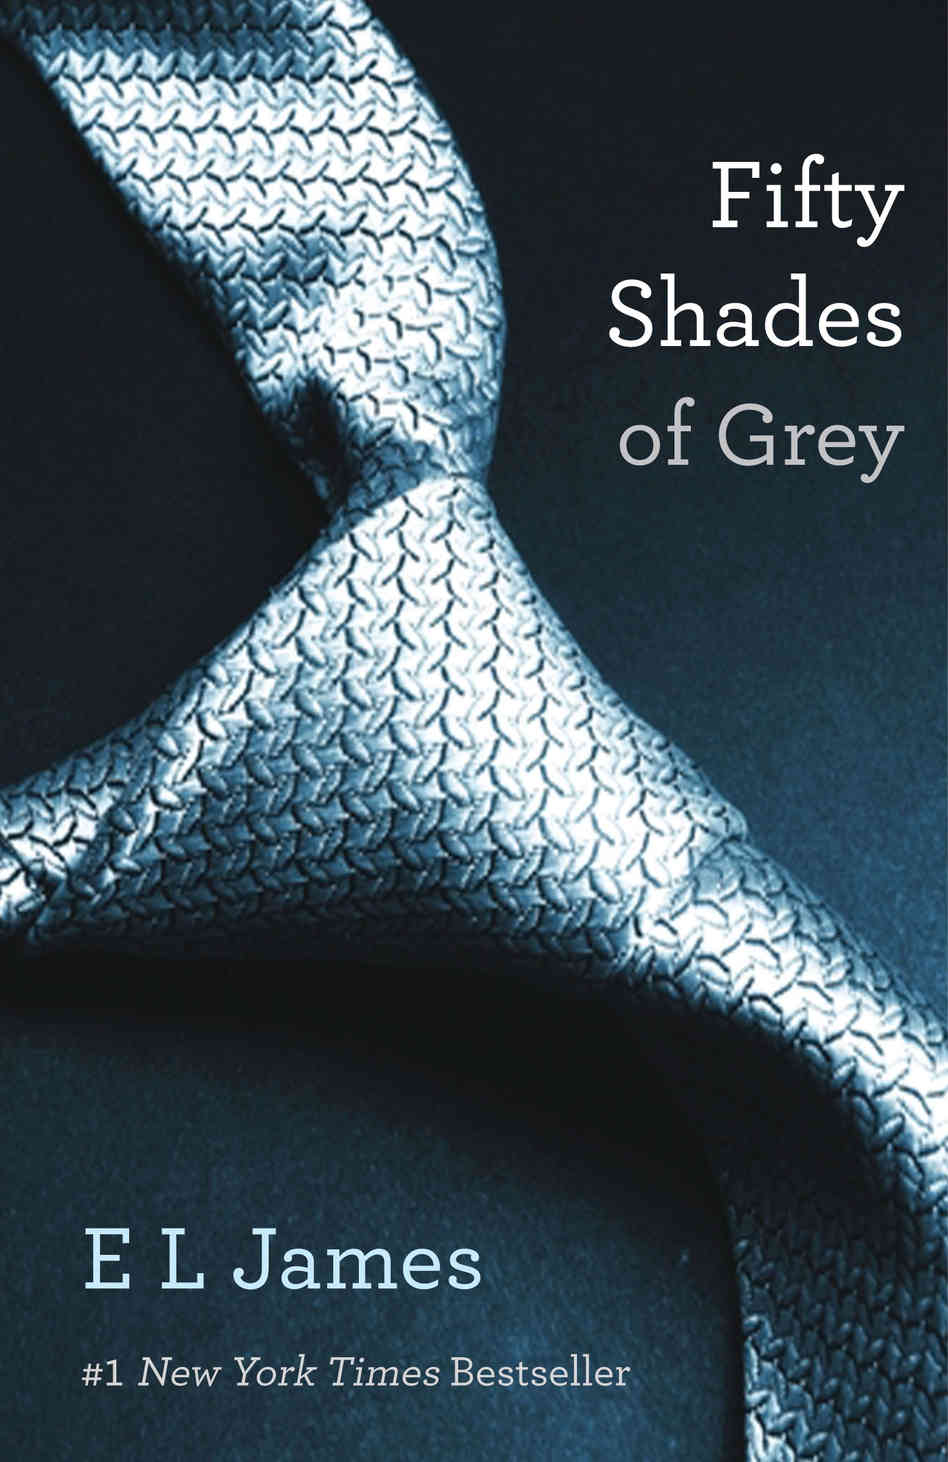 Fifty Shades_book